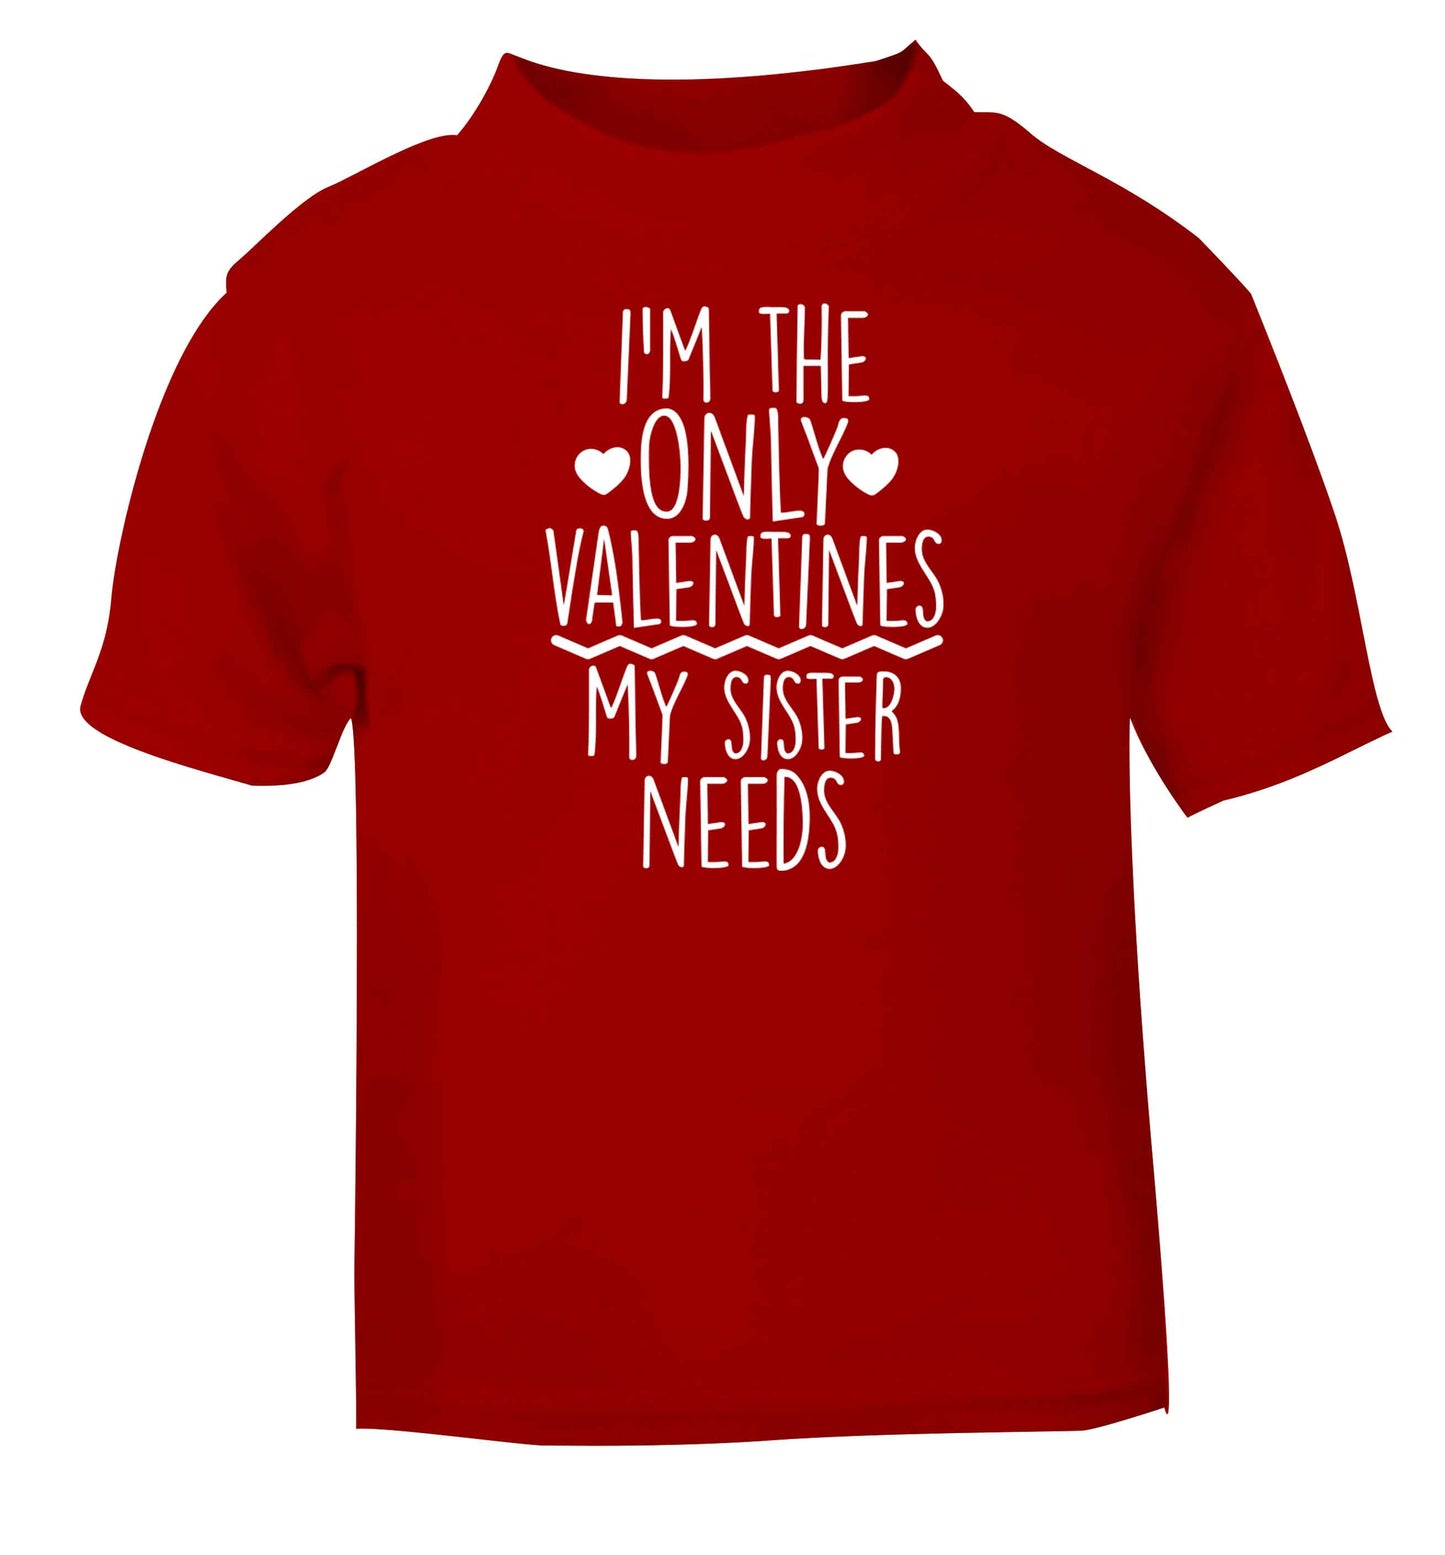 I'm the only valentines my sister needs red baby toddler Tshirt 2 Years